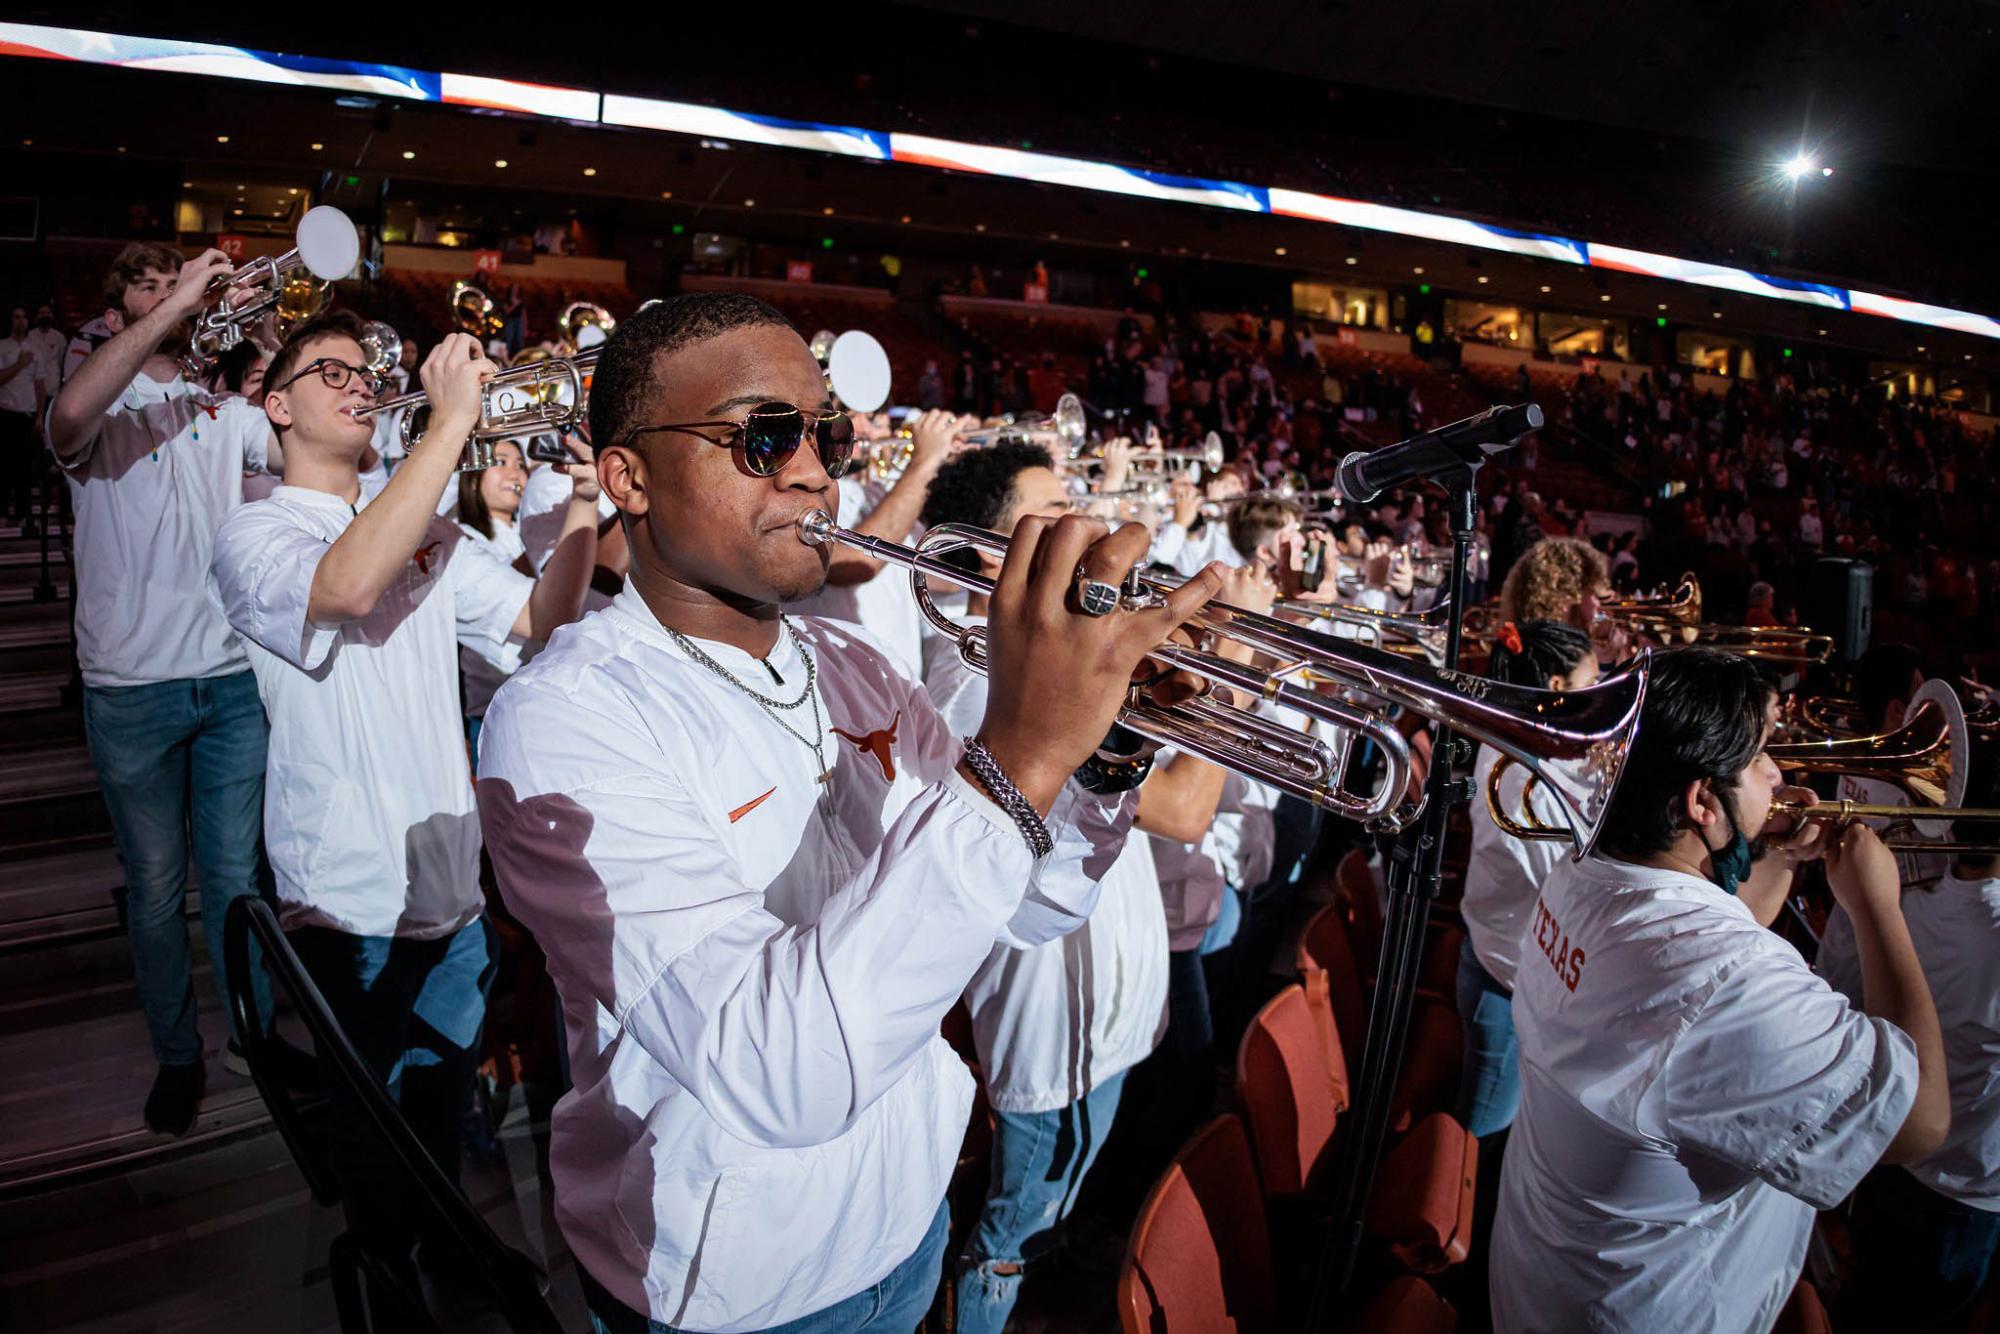 Pep band, standing and playing in the stands of the basketball arena